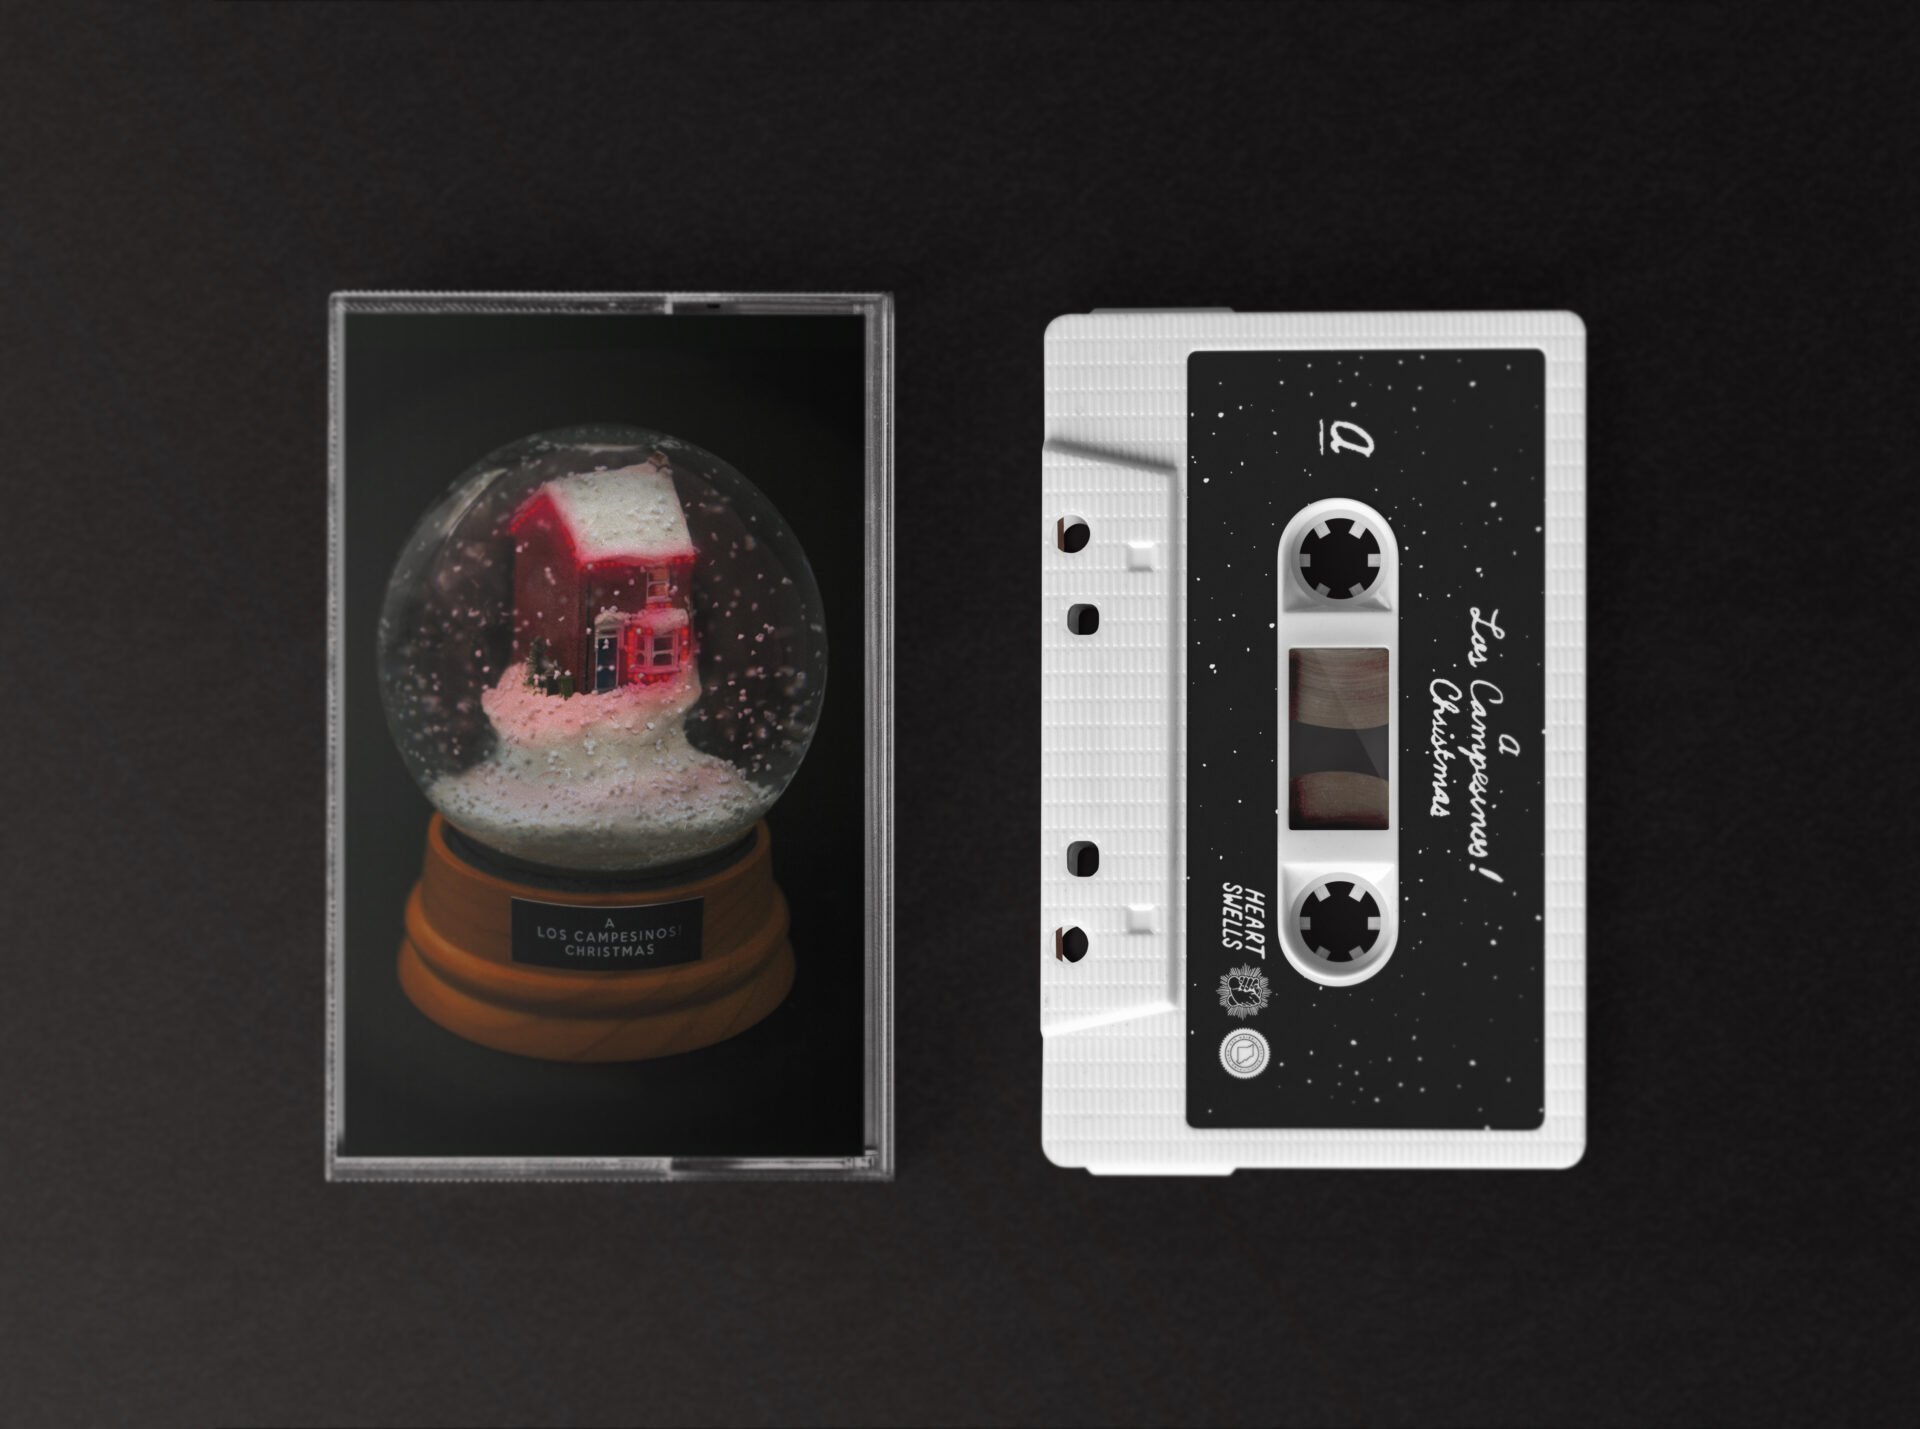 NEWS: Los Campesinos! announce ‘A Los Campesinos! Christmas' Cassette 